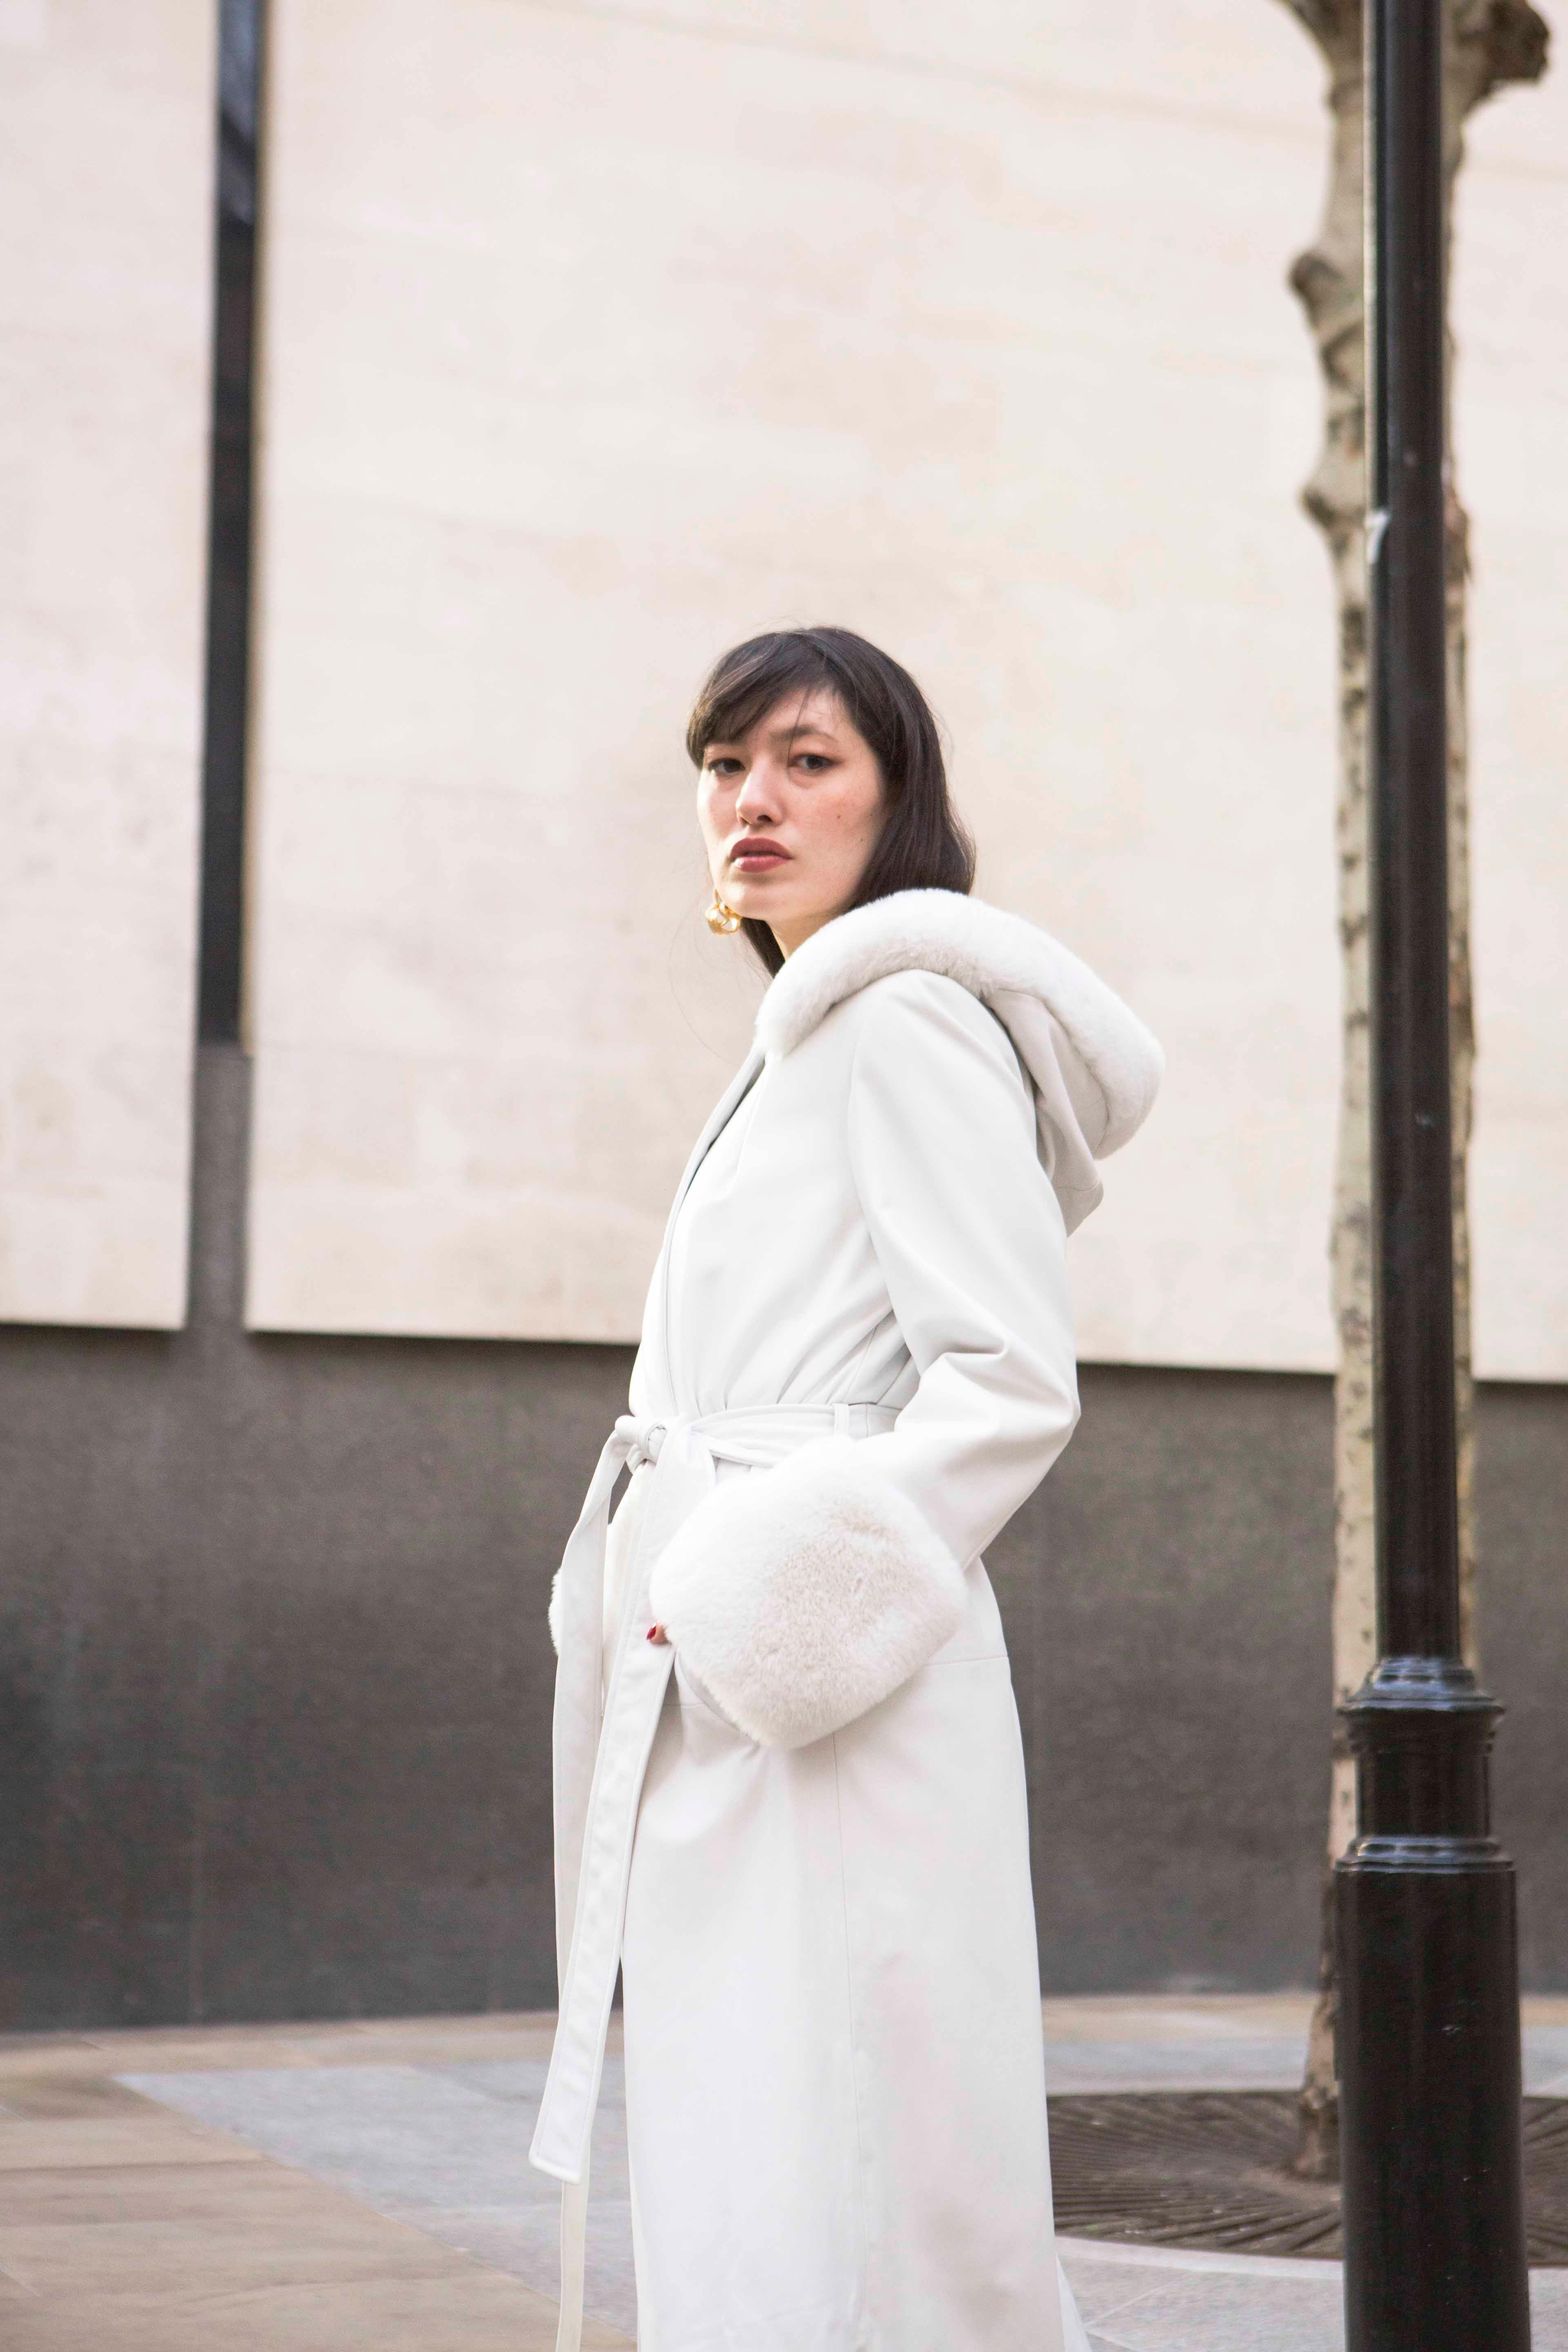 Verheyen Aurora Hooded Leather Trench Coat in White with Faux Fur - Size uk 16

Handmade in London, made with 100% Italian Lambs Leather and the highest quality of faux fur to match, this luxury item is an investment piece to wear for a lifetime. 